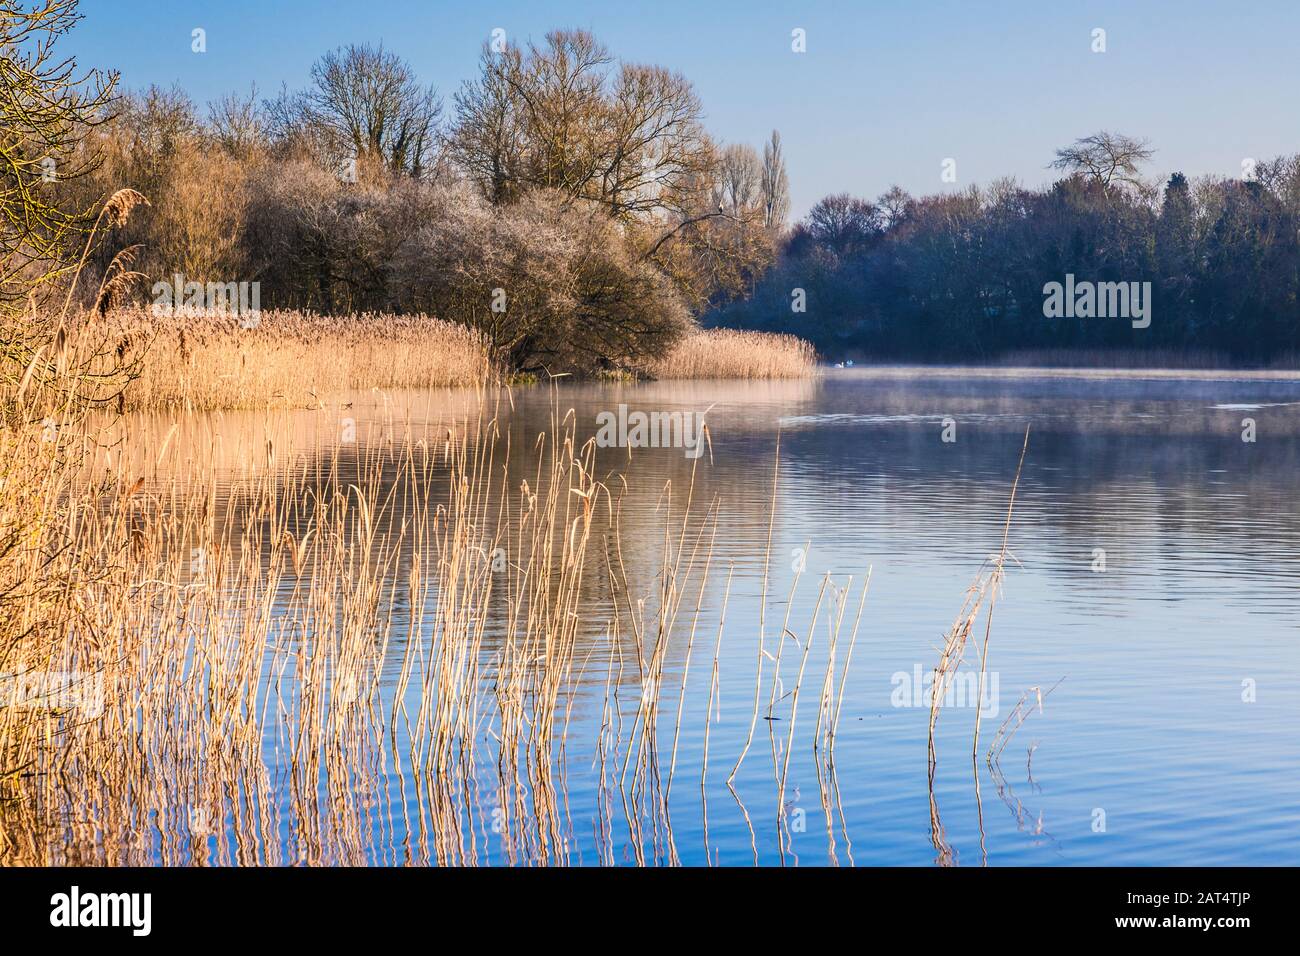 A cold, winter sunrise over Coate Water in Swindon. Stock Photo